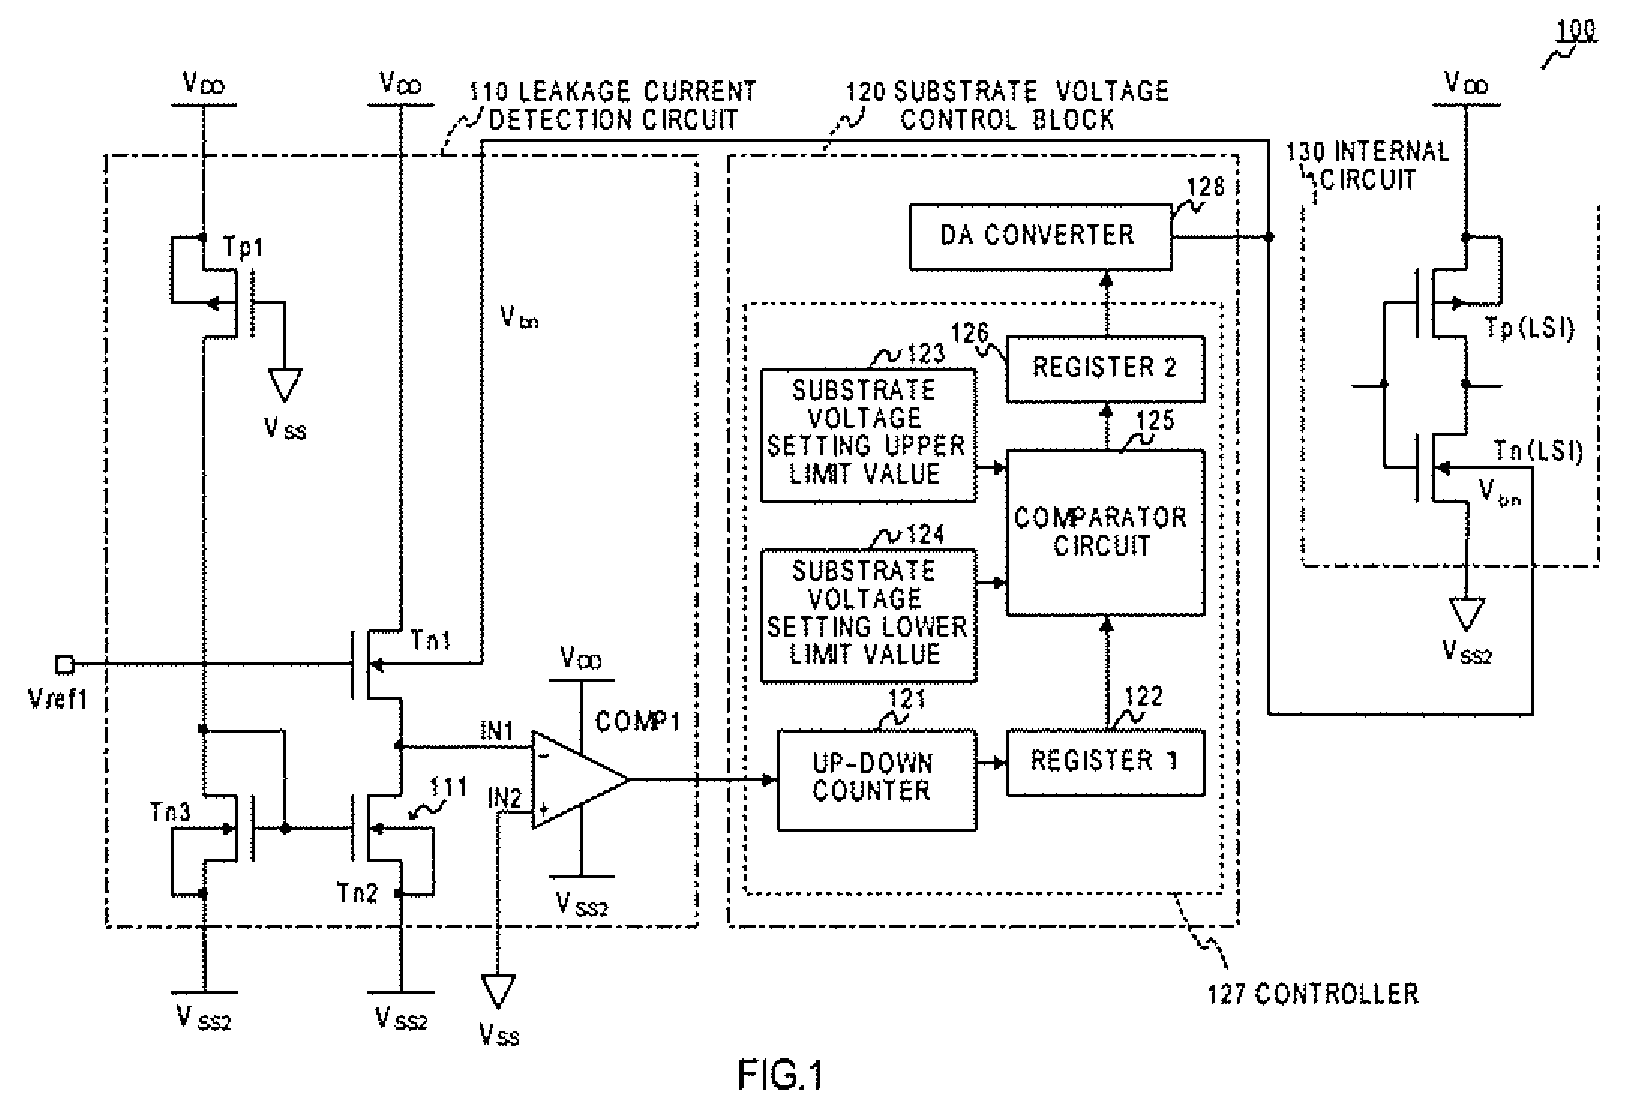 Apparatus for controlling substrate voltage of semiconductor device